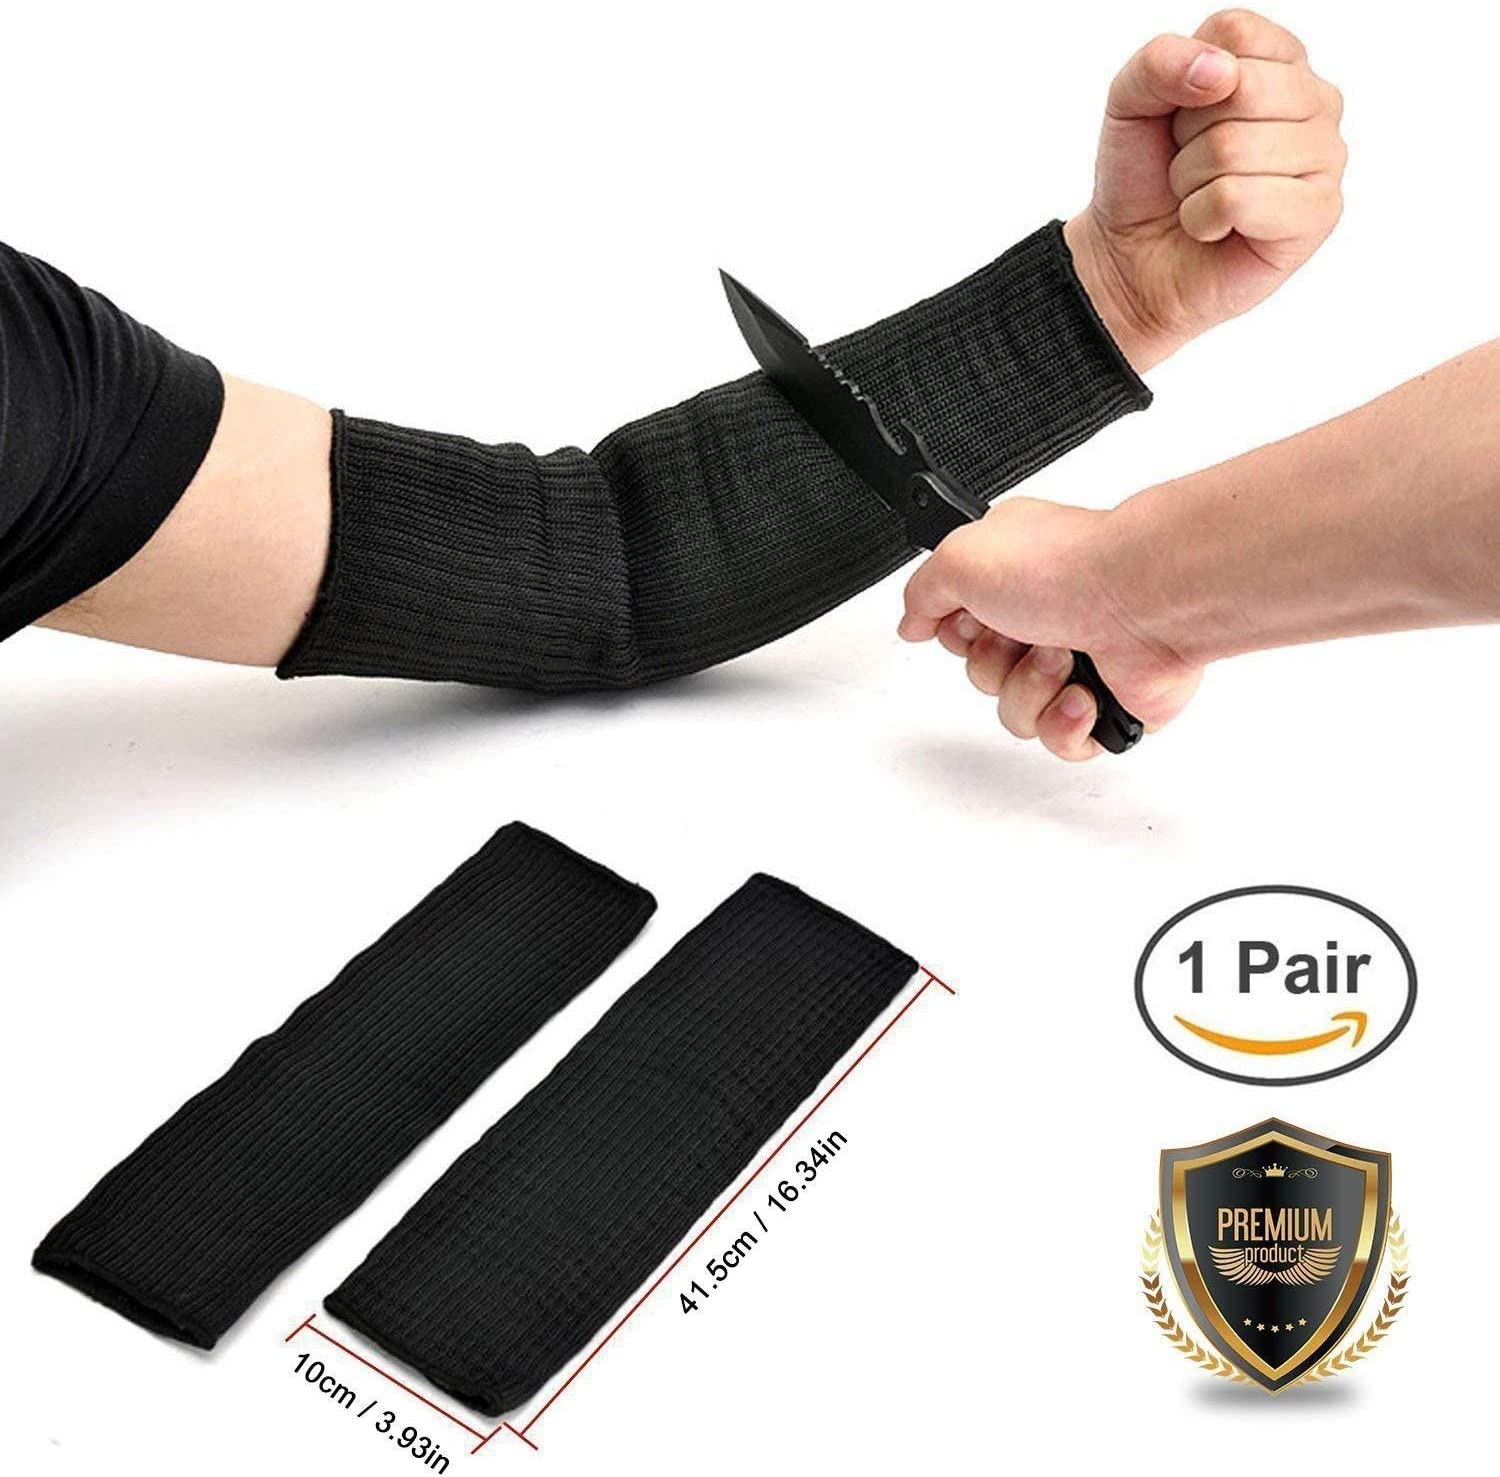 KMBEST Tactical Arm Protection Sleeve Anti-Cut Resistant Anti Abrasion Safety Arm